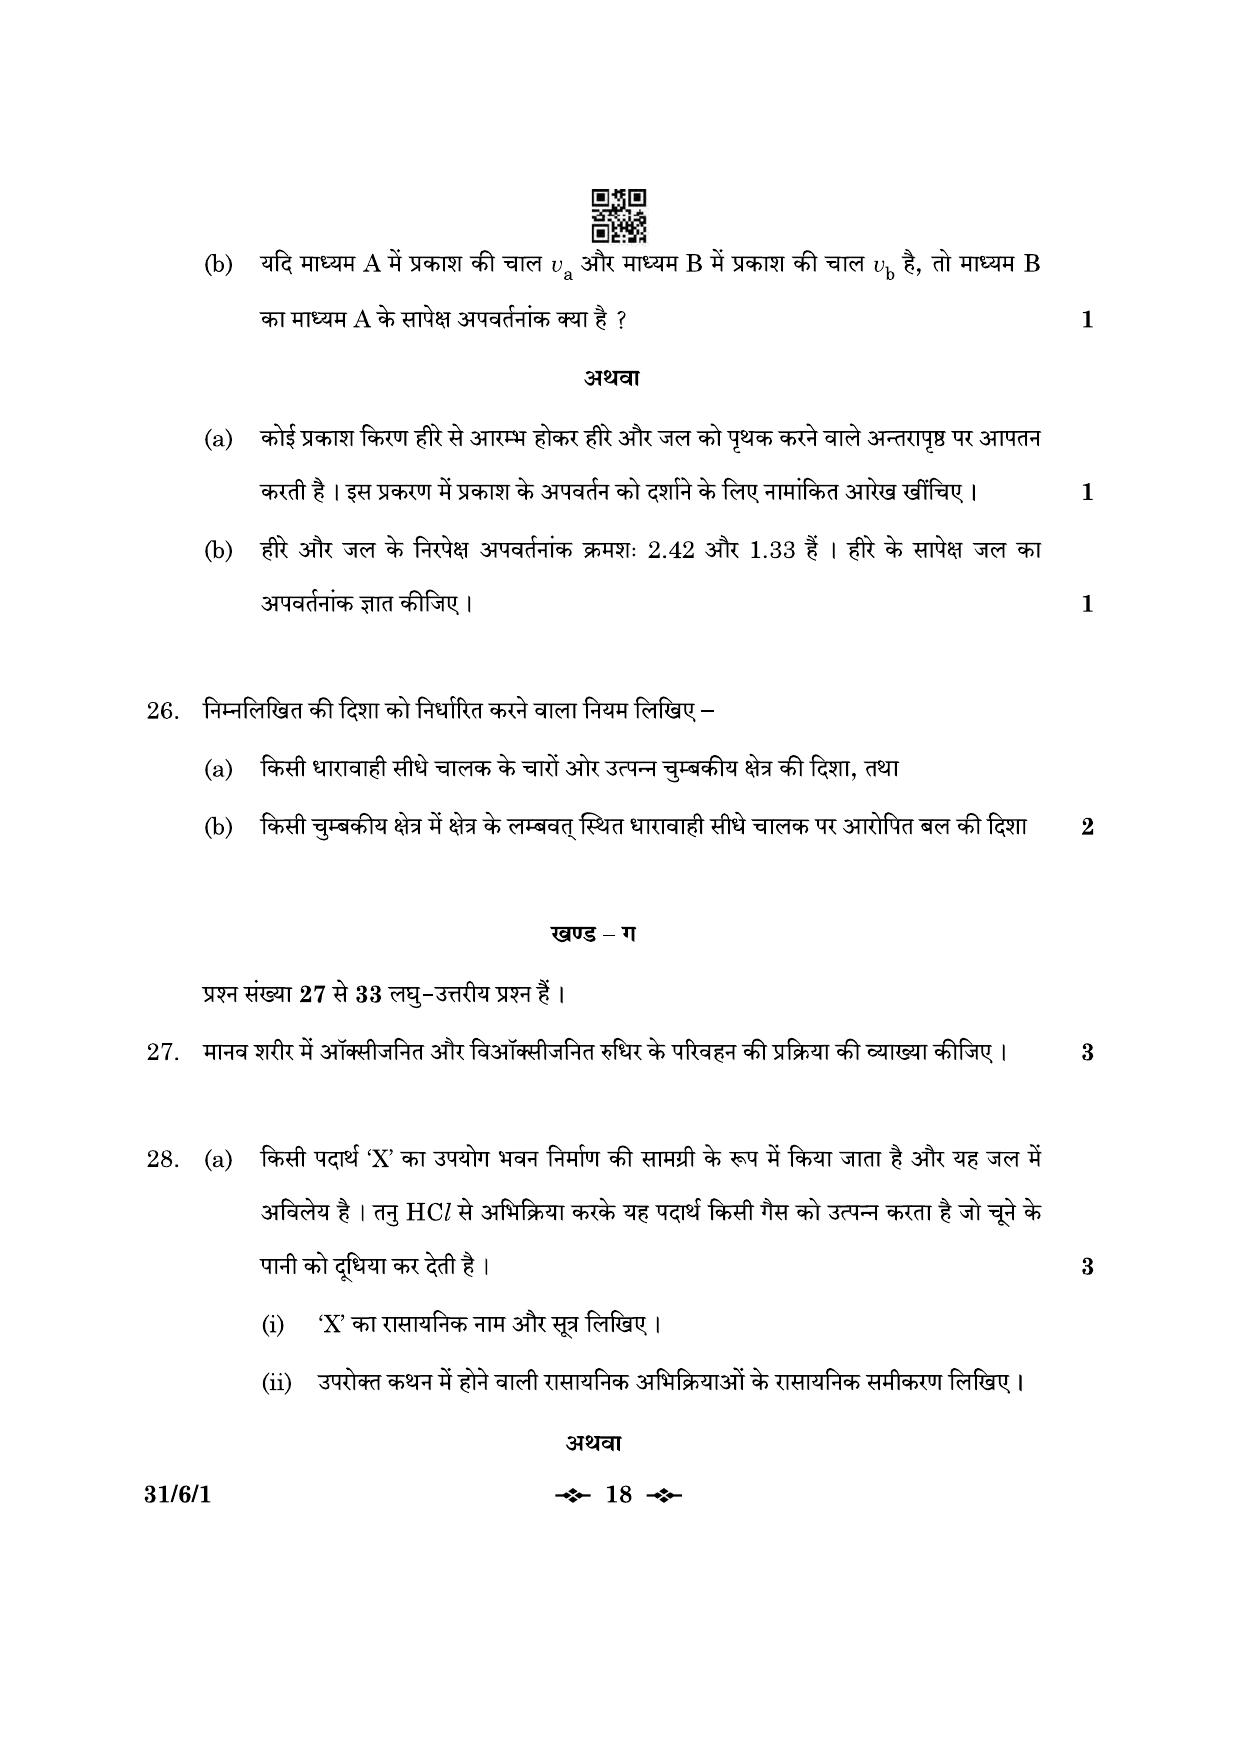 CBSE Class 10 31-6-1 Science 2023 Question Paper - Page 18